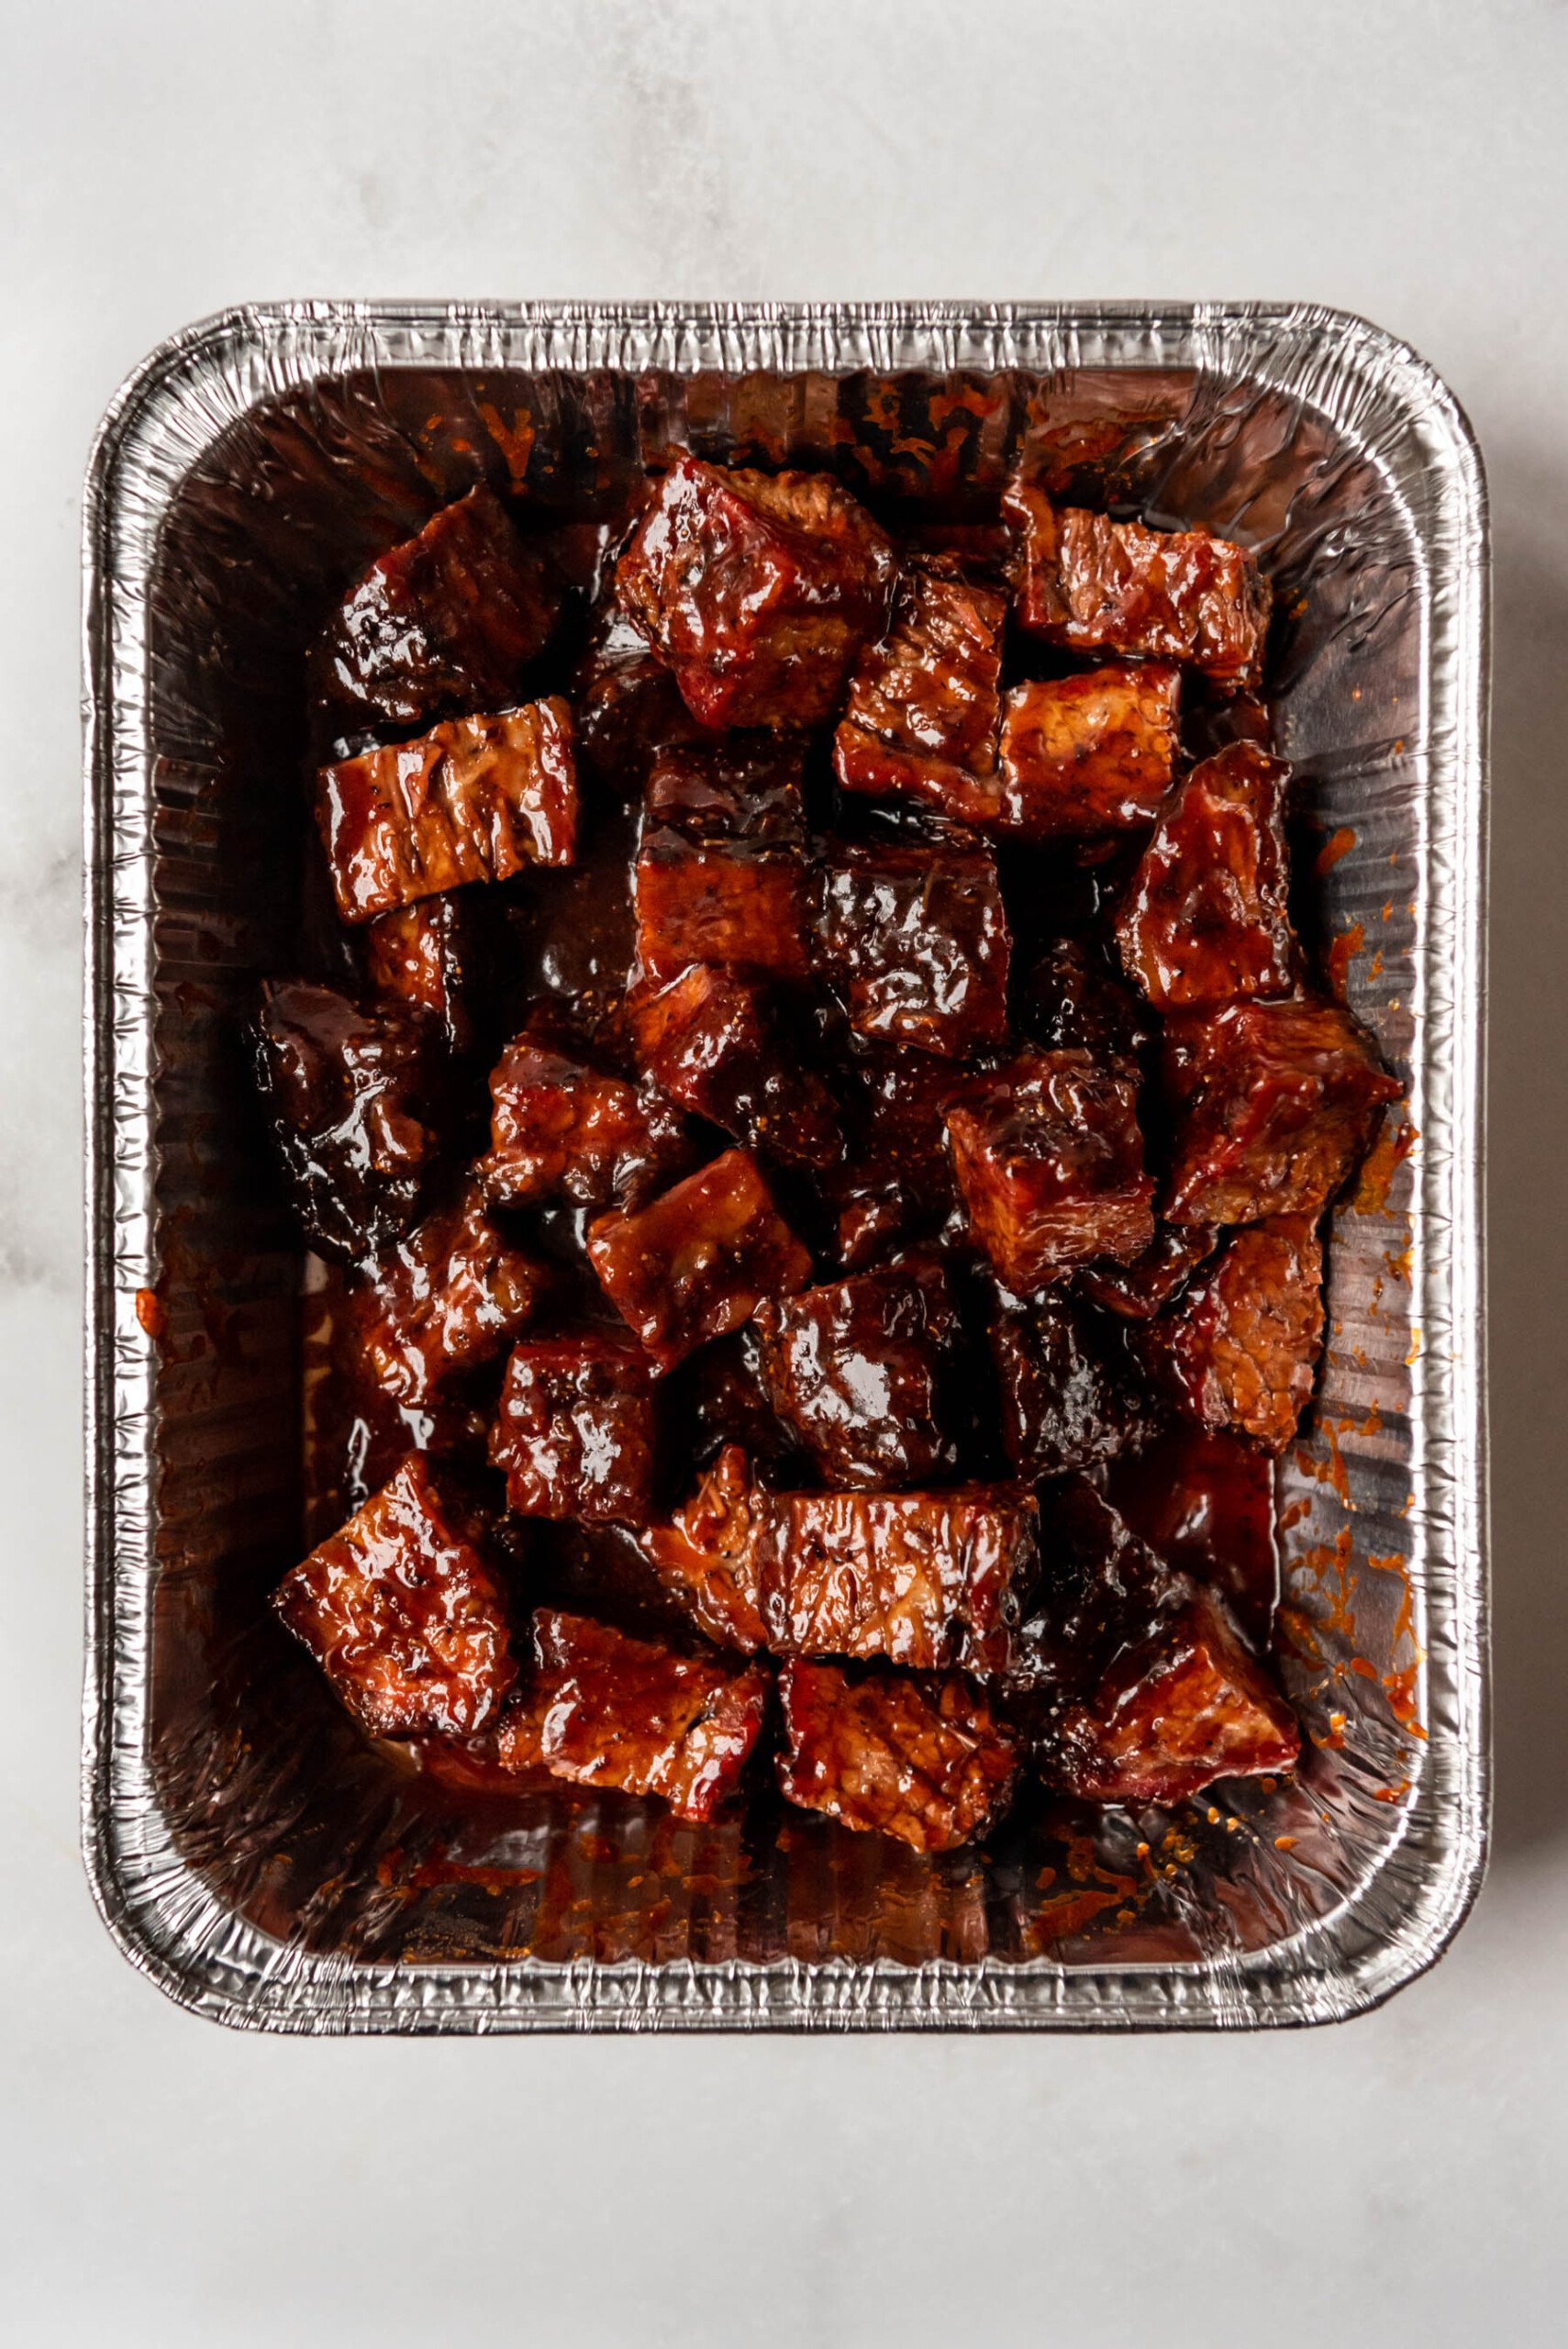 Partially finished brisket burnt ends after removing the foil covering them.